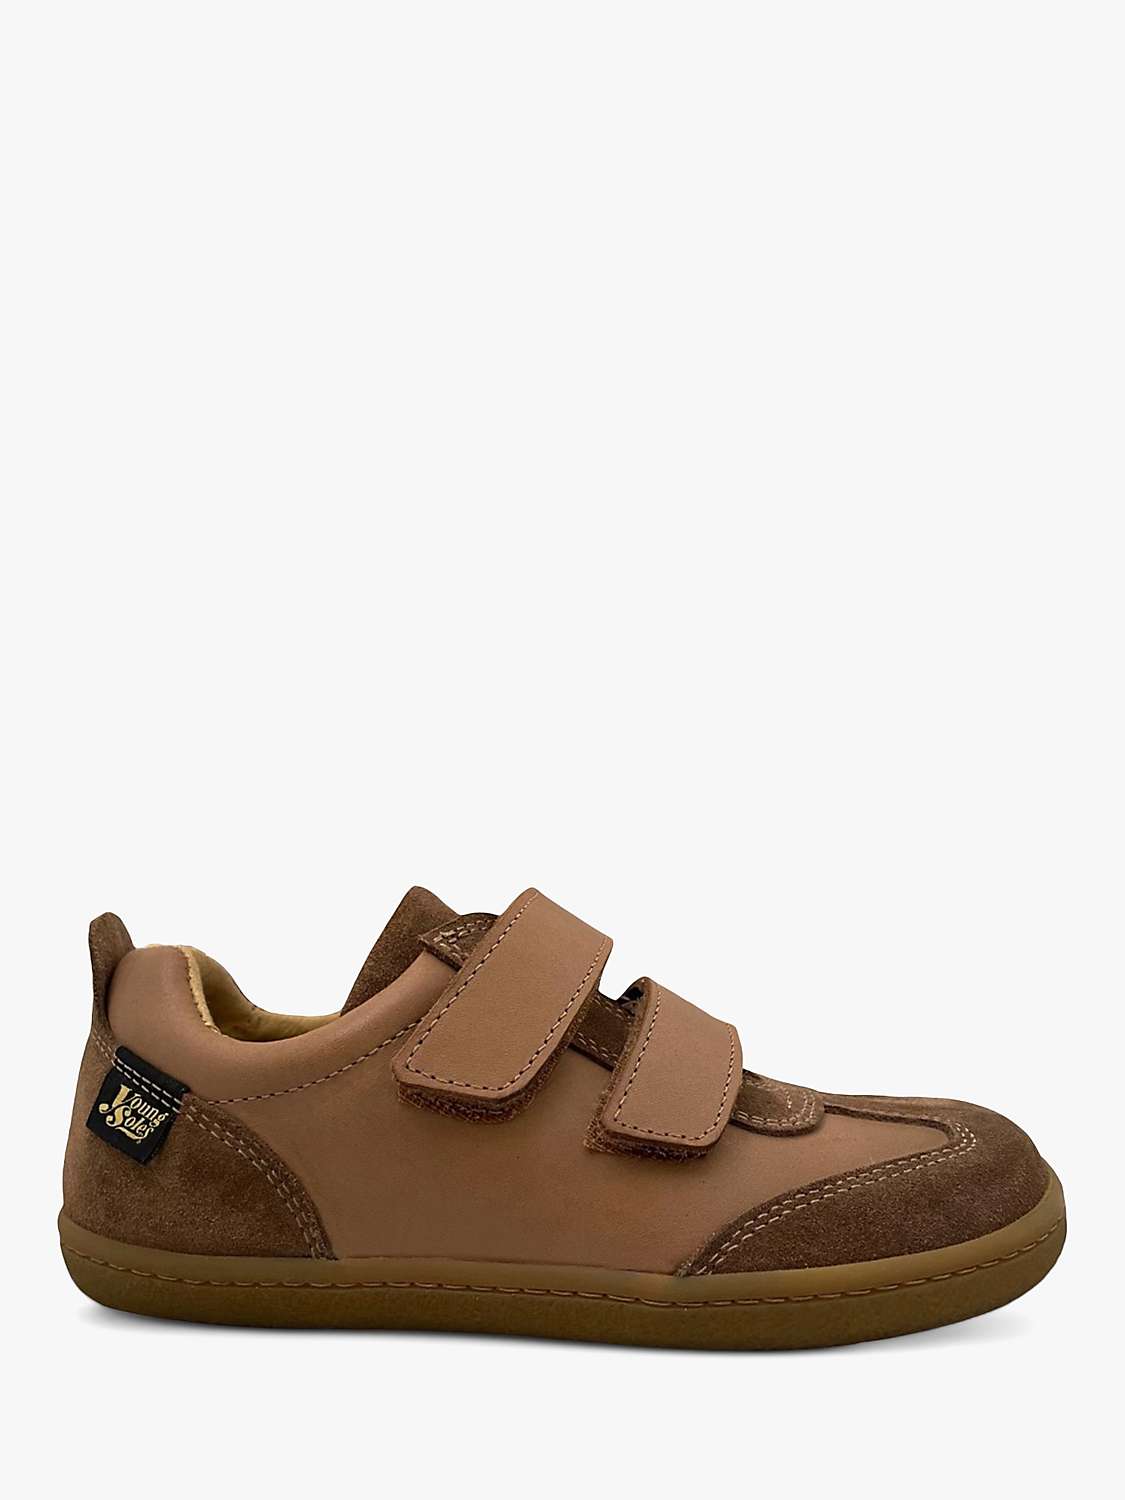 Buy Young Soles Kids' Pele Suede and Leather Trainers Online at johnlewis.com